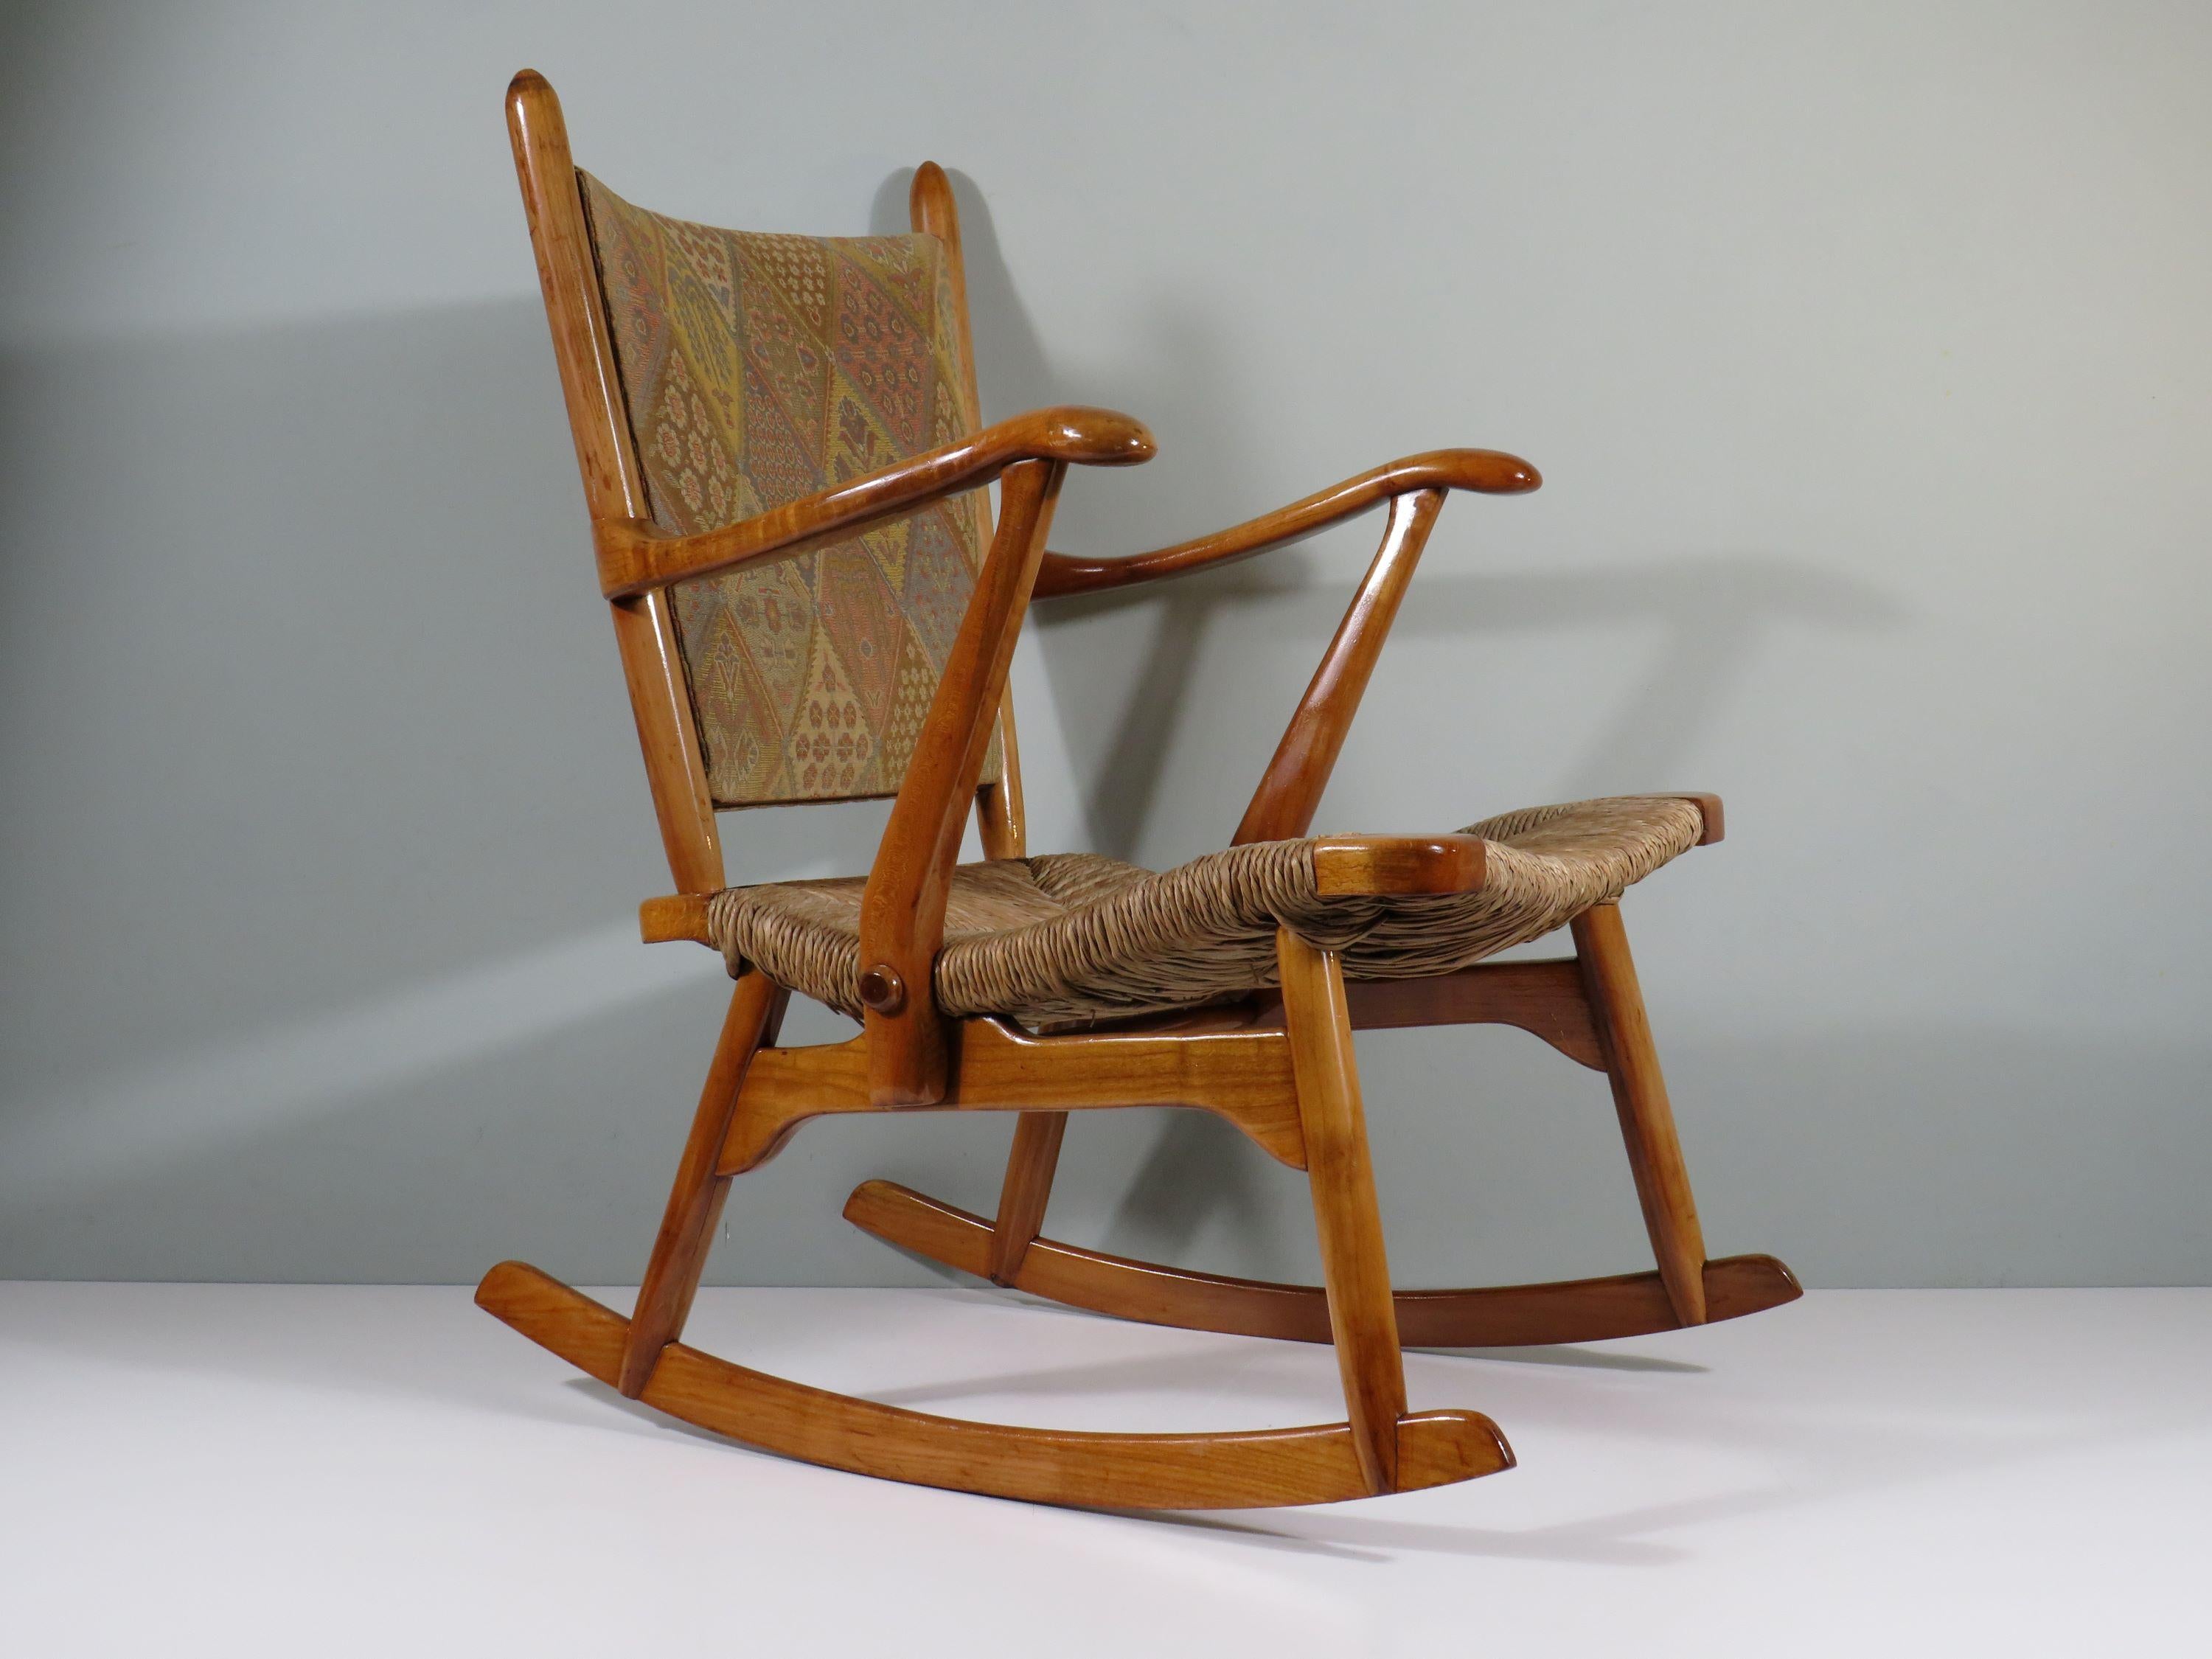 Varnished wooden rocking chair with hand-woven rush seat and upholstered back with original fabric.
The organically designed chair is in good and sturdy condition.
The seat height is 40 cm at the front of the seat and 34 cm in the middle of the seat.